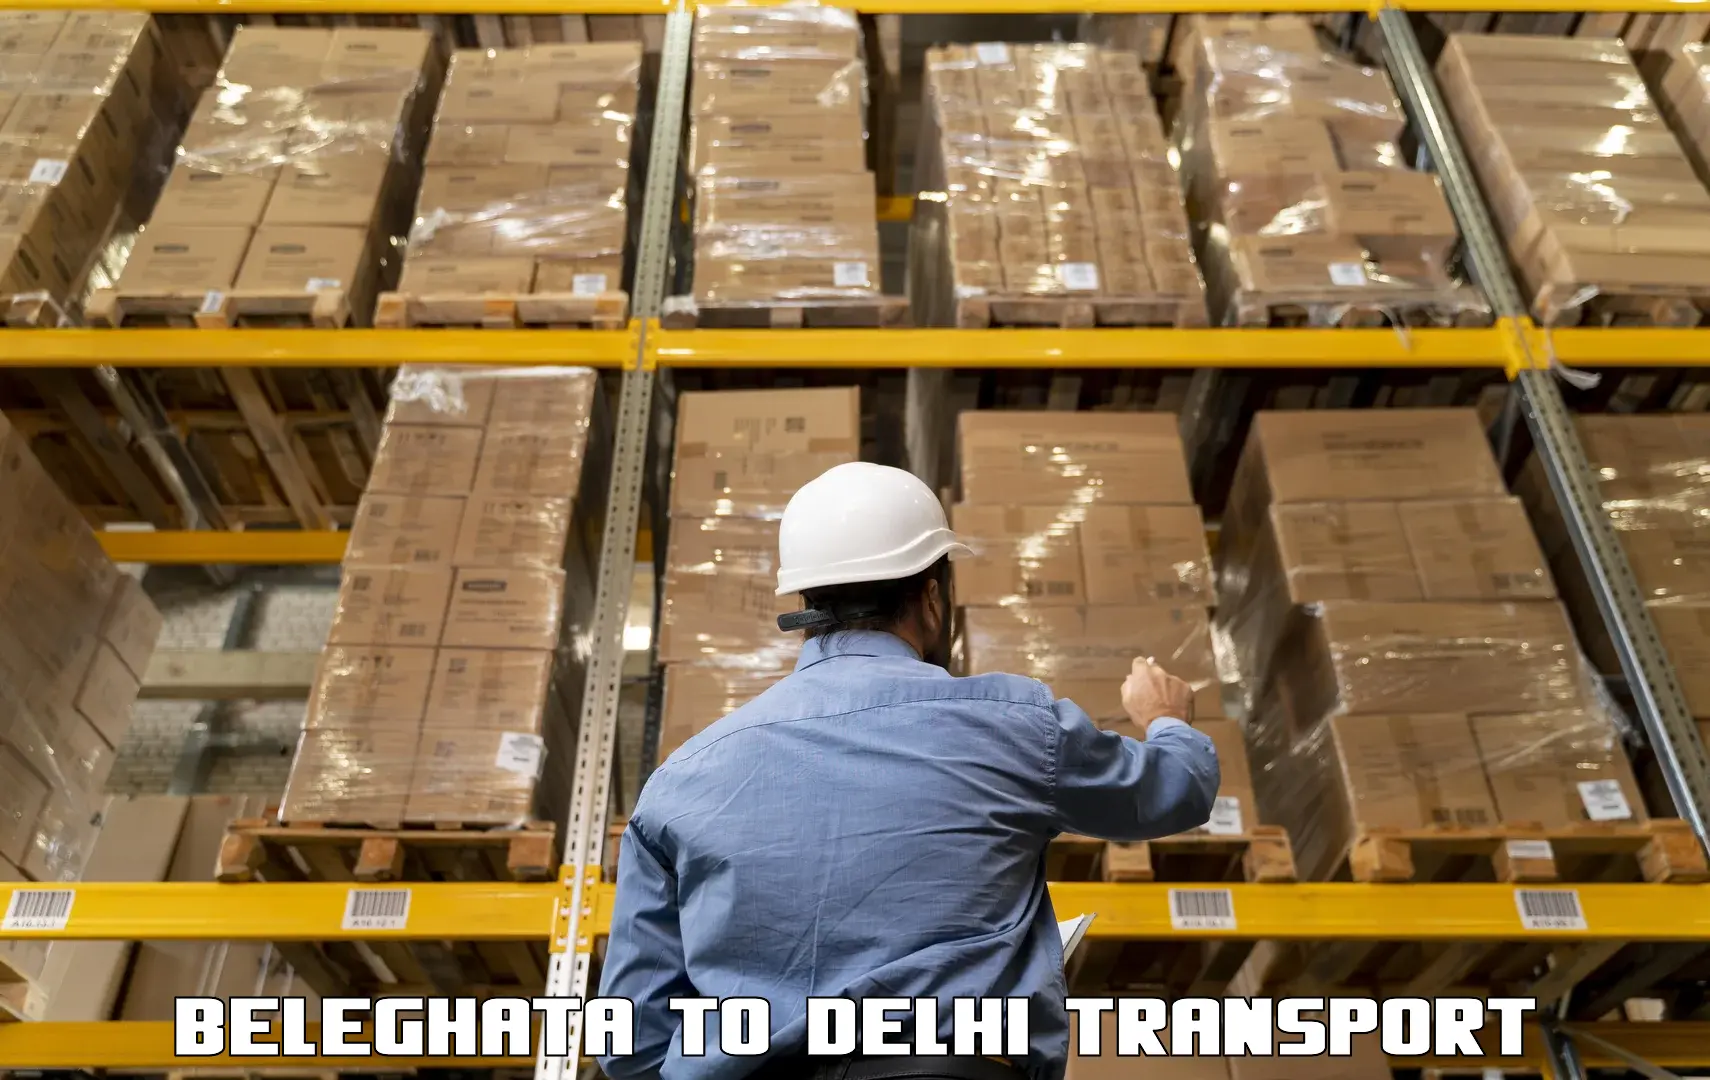 Daily parcel service transport Beleghata to NCR